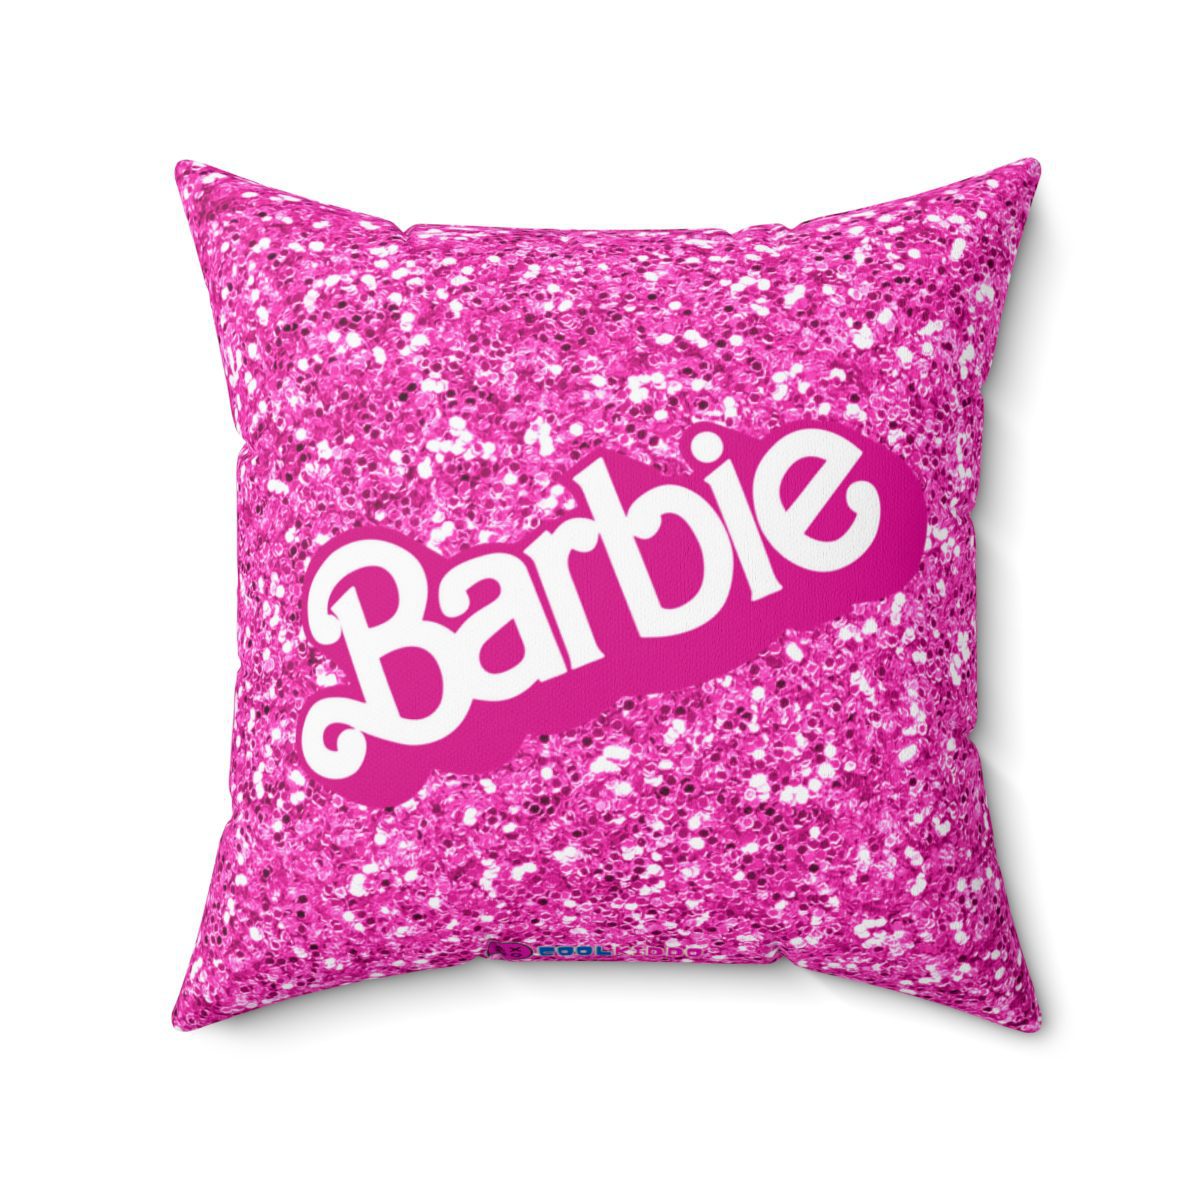 Barbie Glitter Simulation Pink Cushion: Double-Sided Sparkle for Stylish Comfort Cool Kiddo 24